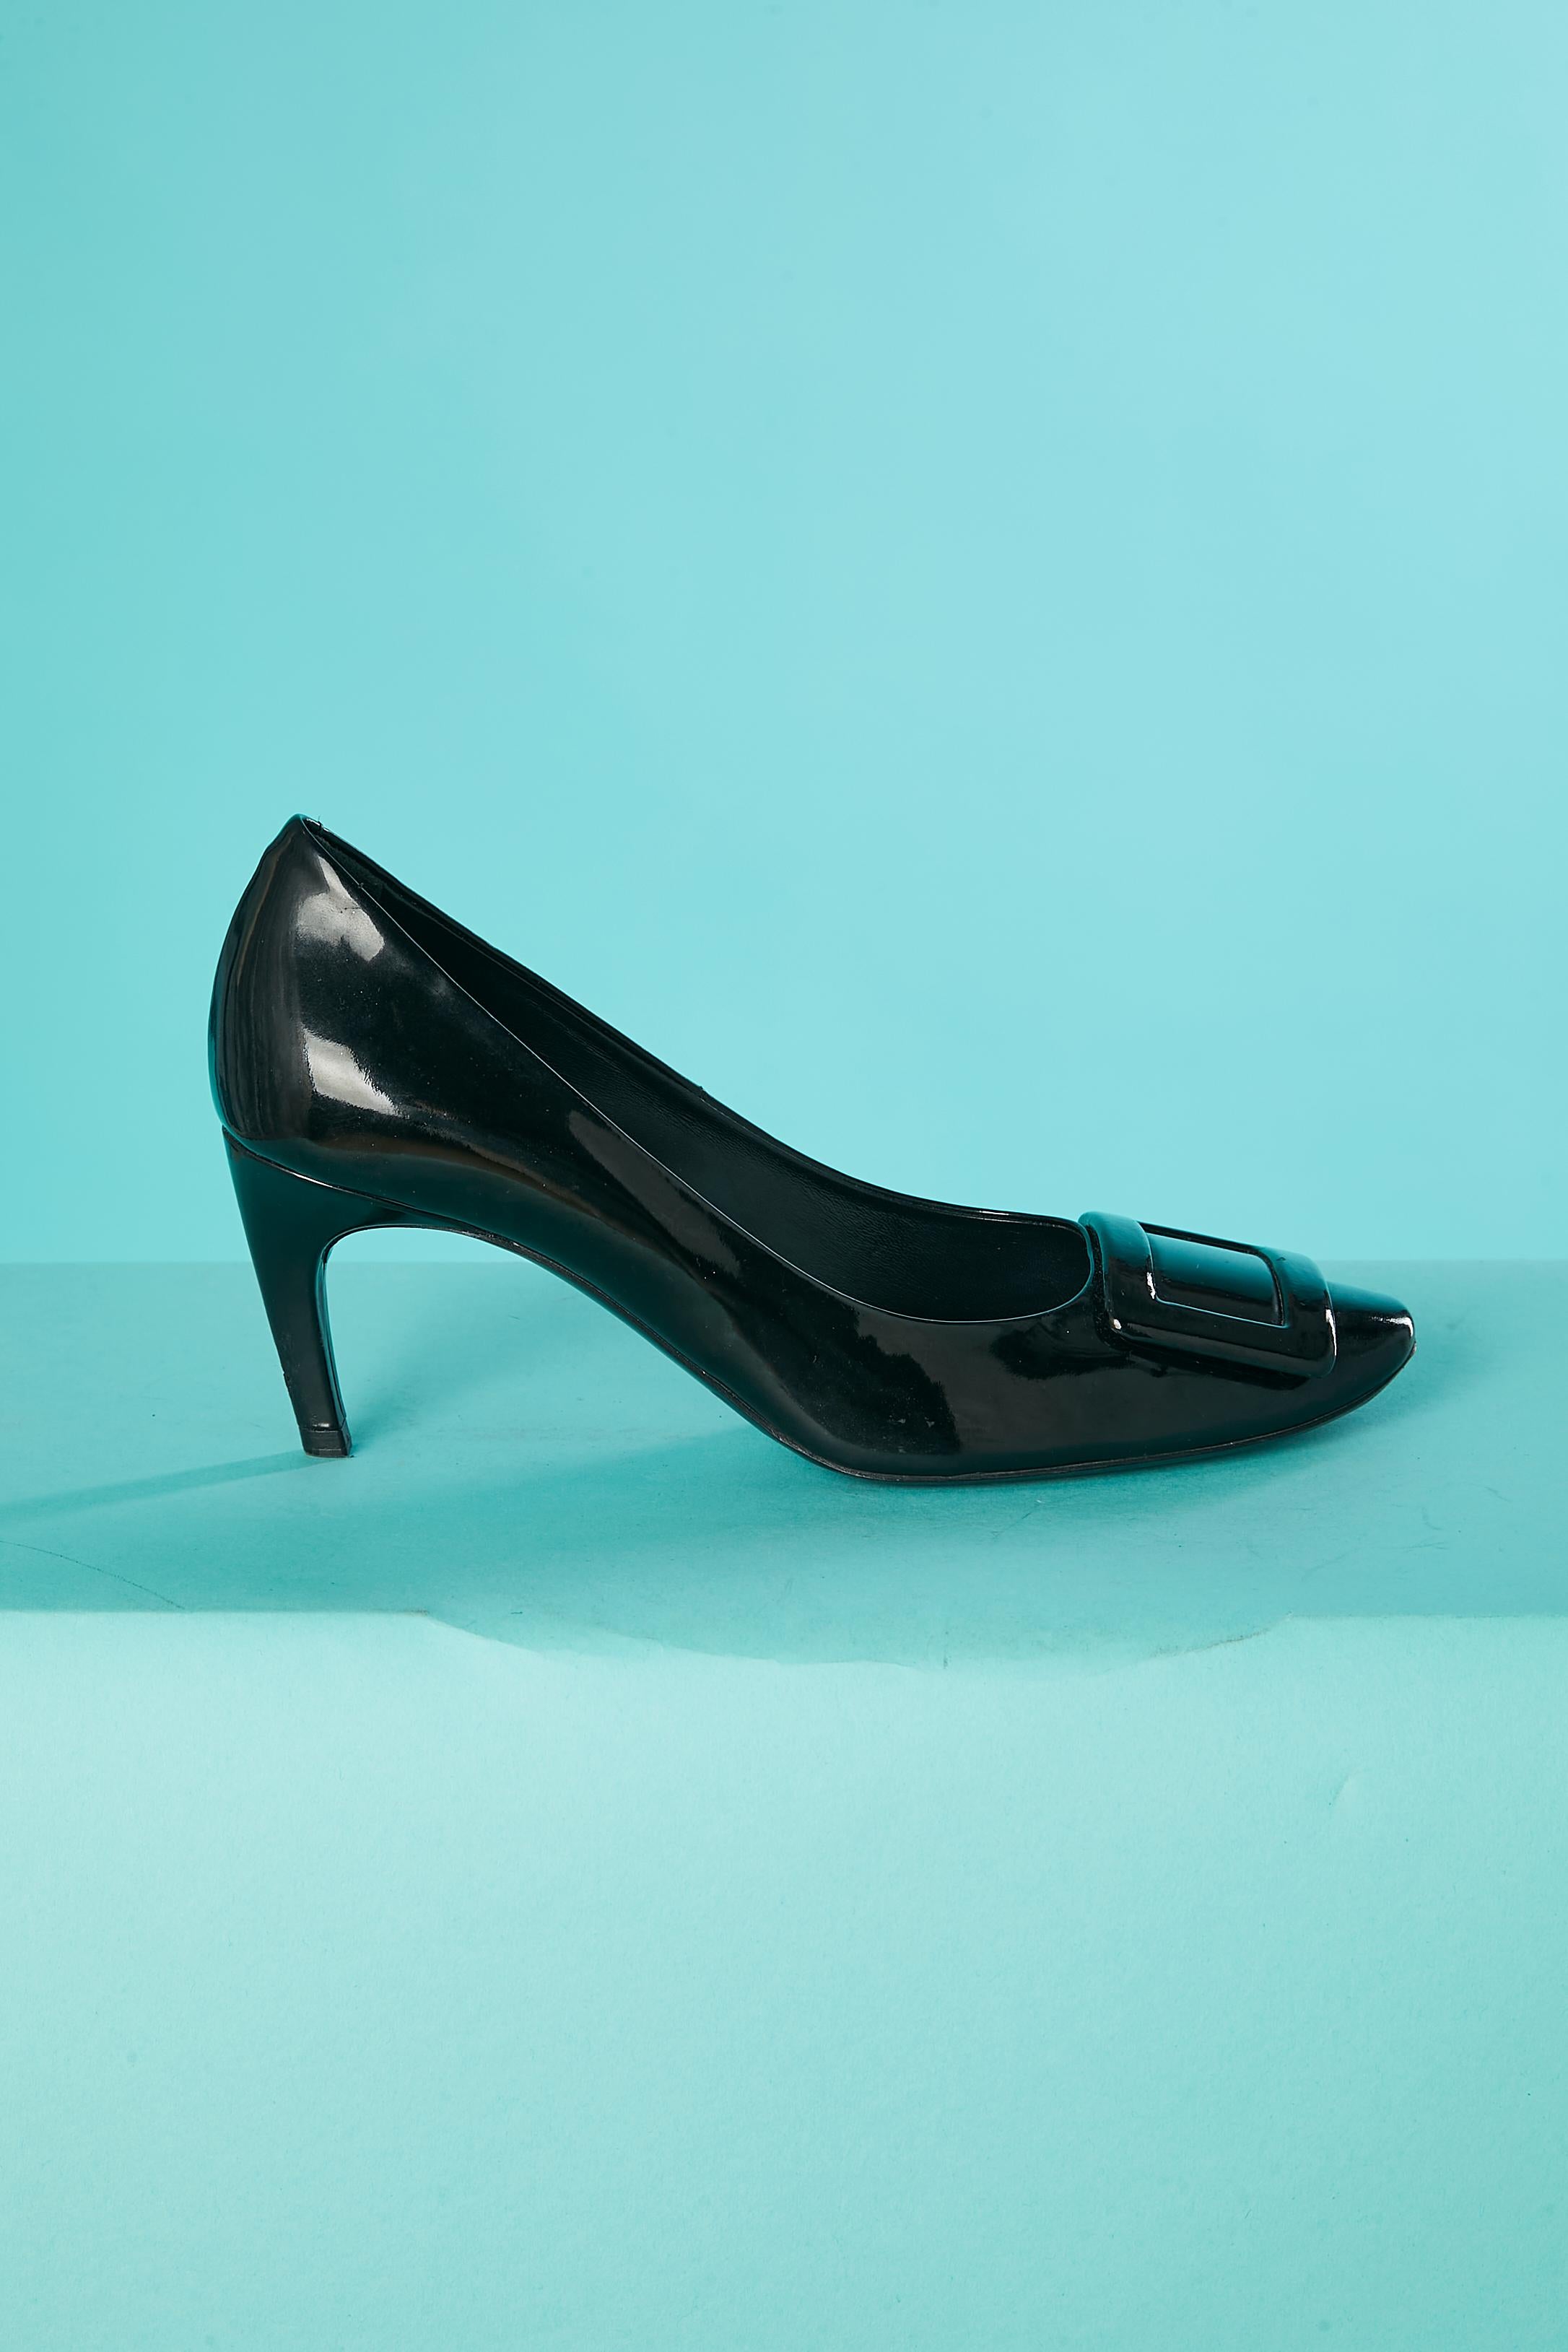 Black patent leather pump with buckle in the same material.
Heel's height : 7 cm
SHOE SIZE : 37,5 (Eu) 6 (US) 